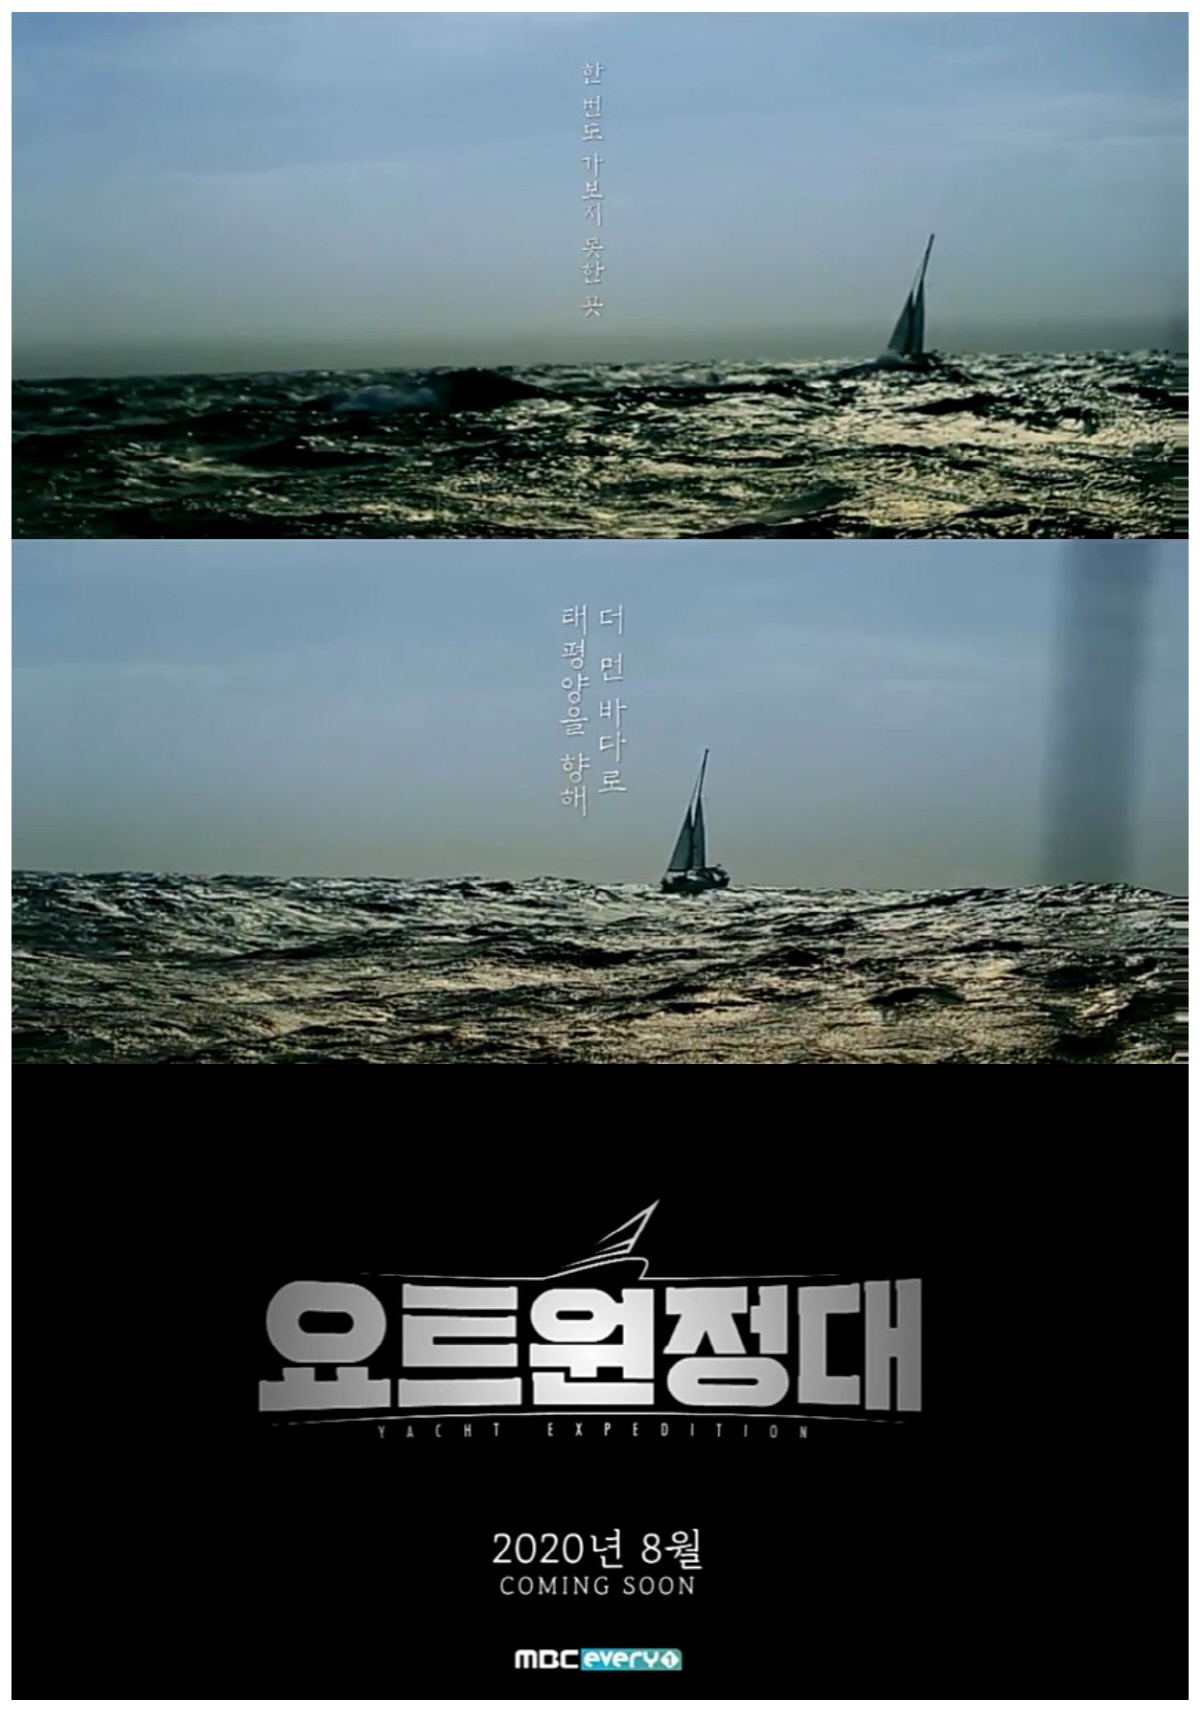 MBC Everlons new entertainment program Yot Expedition released its first Teaser video.The yacht expedition, which is scheduled to be broadcasted in August, is a documentary entertainment program featuring the process of top model on the Pacific Ocean voyage by four men who dreamed of adventure.We will experience nature on the journey to Pacific Ocean on a yacht and plan to find the hope and value of life.In the public footage, you can see the yacht expedition going to Pacific Ocean against rough waves.The text To a Farther Sea to Pacific Ocean is emerging, raising expectations.Yot Expedition will release various Teaser videos until broadcast.It is expected that the charm of Yot Expedition will be able to be seen in advance from the grandeur of Pacific Ocean that has not been seen on the air to the top model of the adventure and the unexpected crisis situation.Jin Goo, Choi Siwon, Chang Kiha, and Song Ho-joon, who have dreamed of adventure, are also watching points.The four people who met for the first time through the Yot Expedition are wondering what story they will make during the long voyage.On the other hand, Yot Expedition will show the world of marine and yacht, which is an unusual genre that was not seen in entertainment programs, with various eyes.The top model of the four mens yacht sailing Yot Expedition will be broadcasted at MBC Everlon in August.